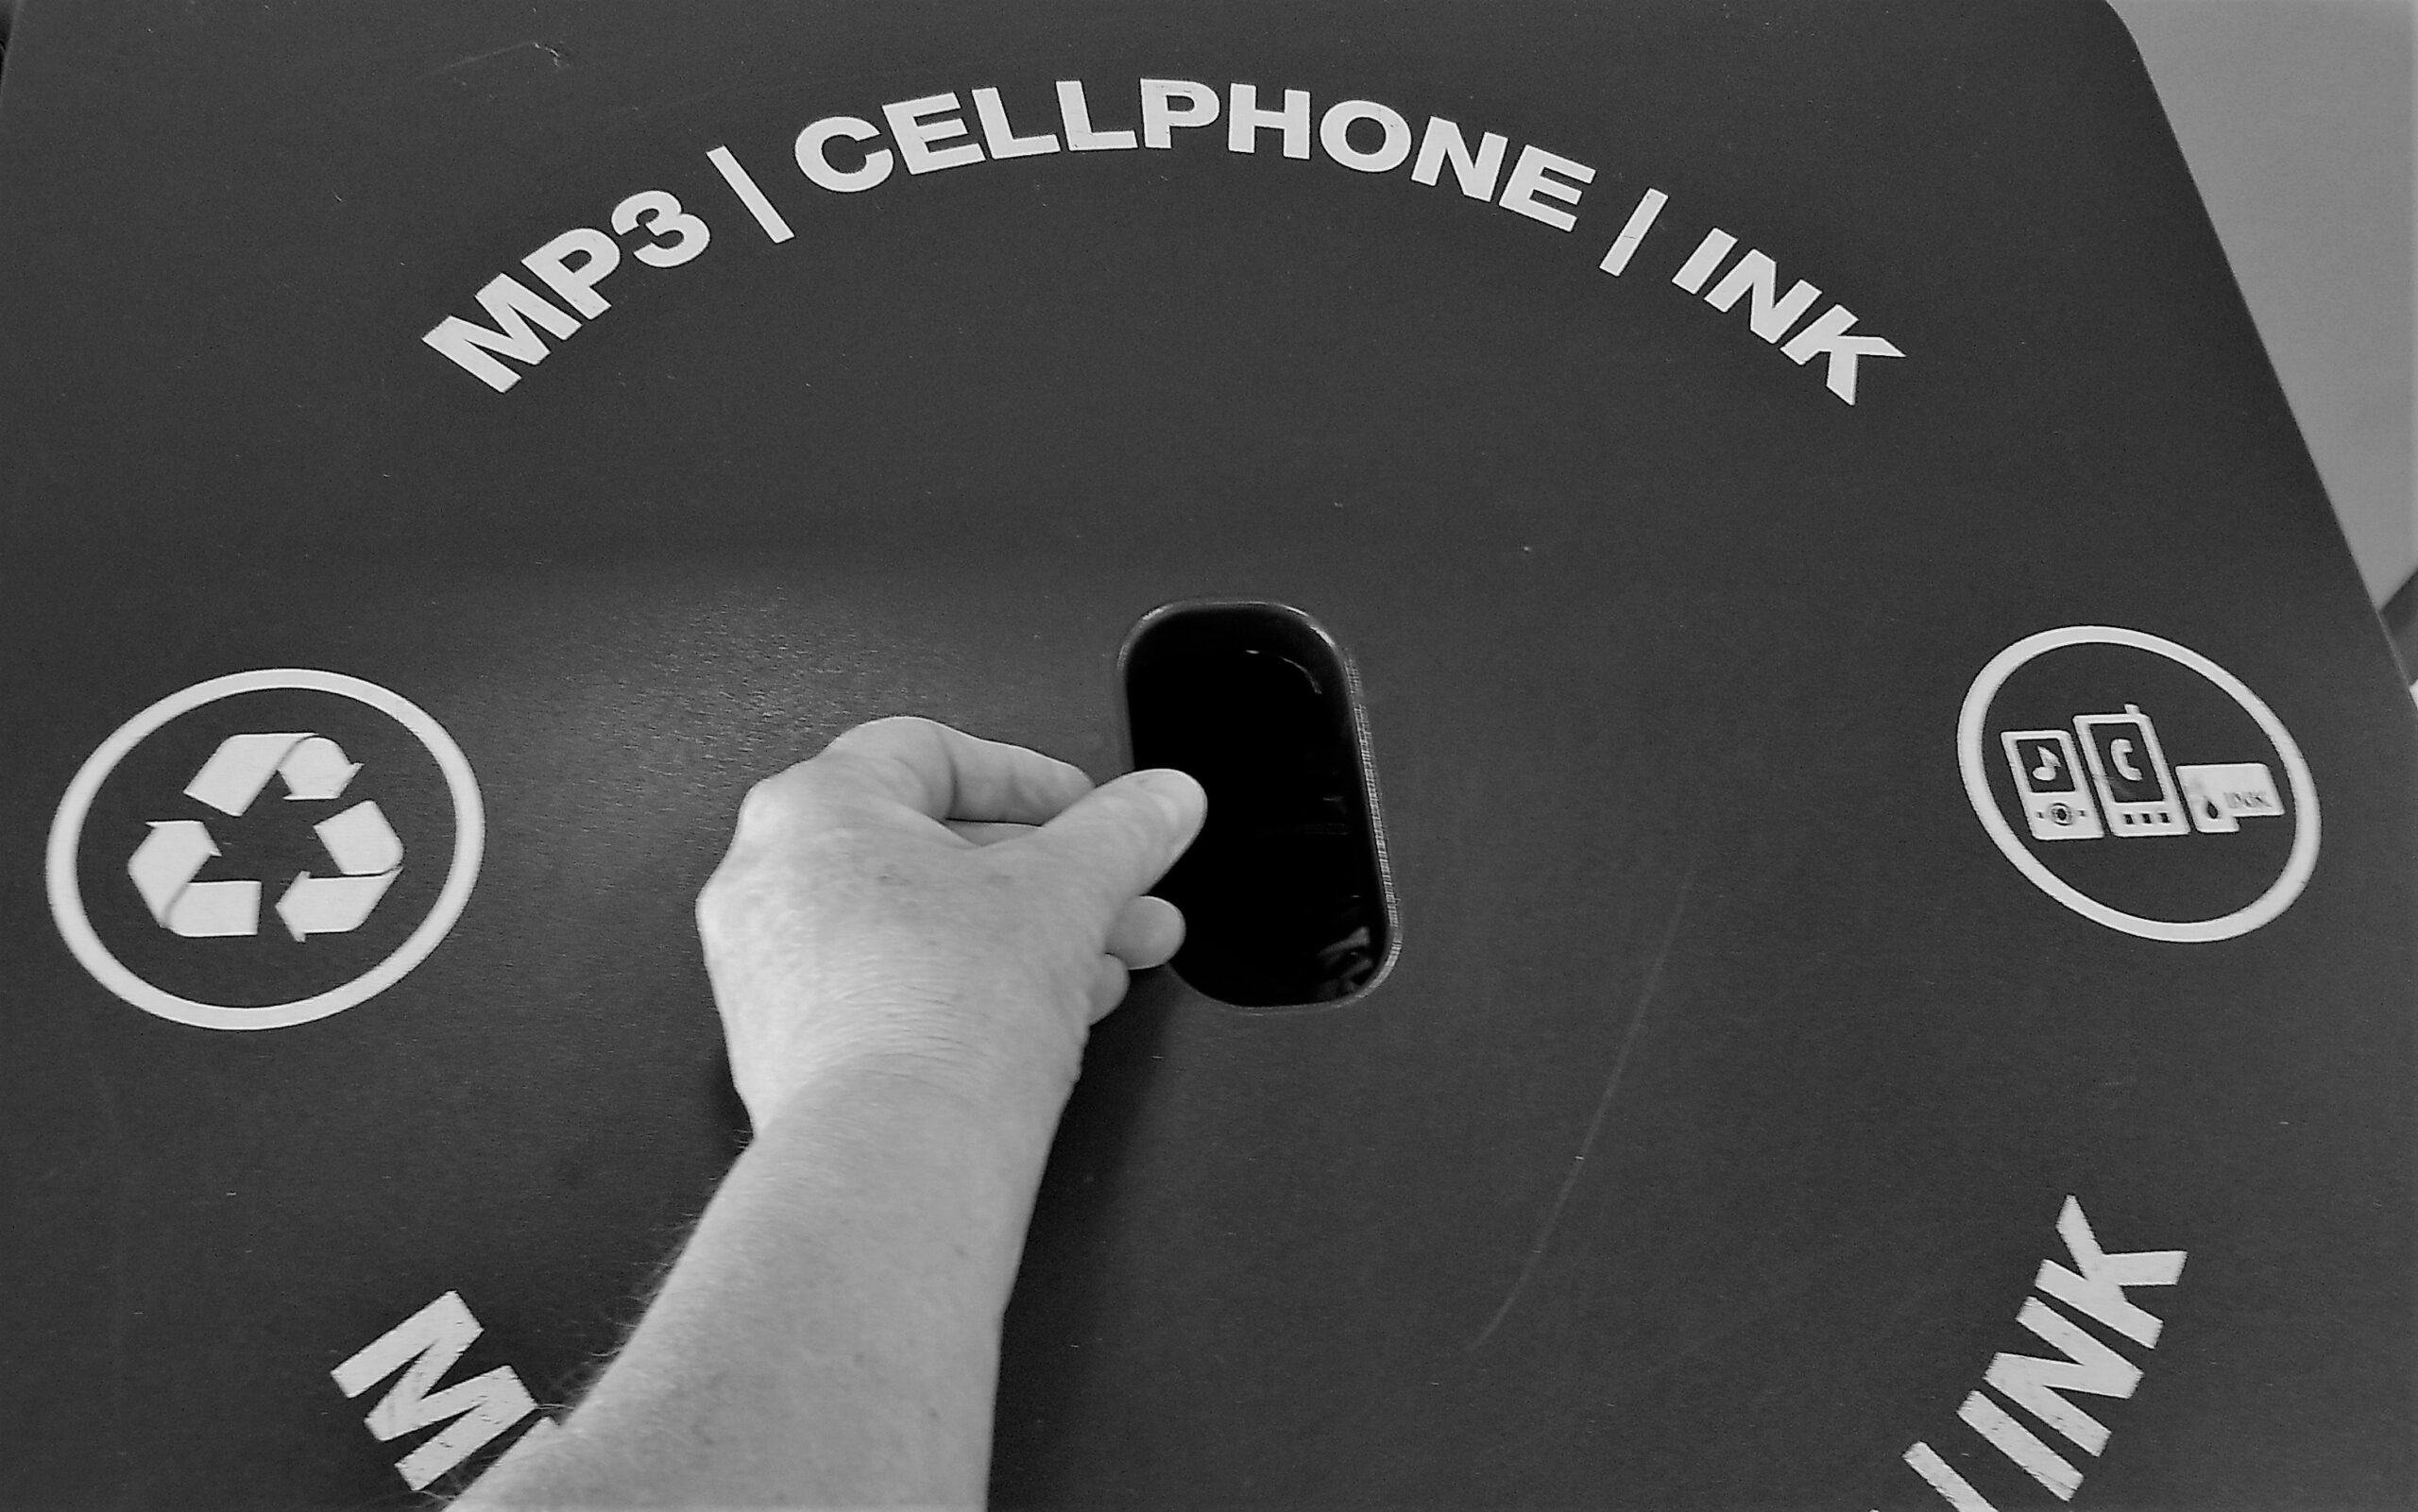 Electronic disposal law for Cellphones, ink cartriges, etc